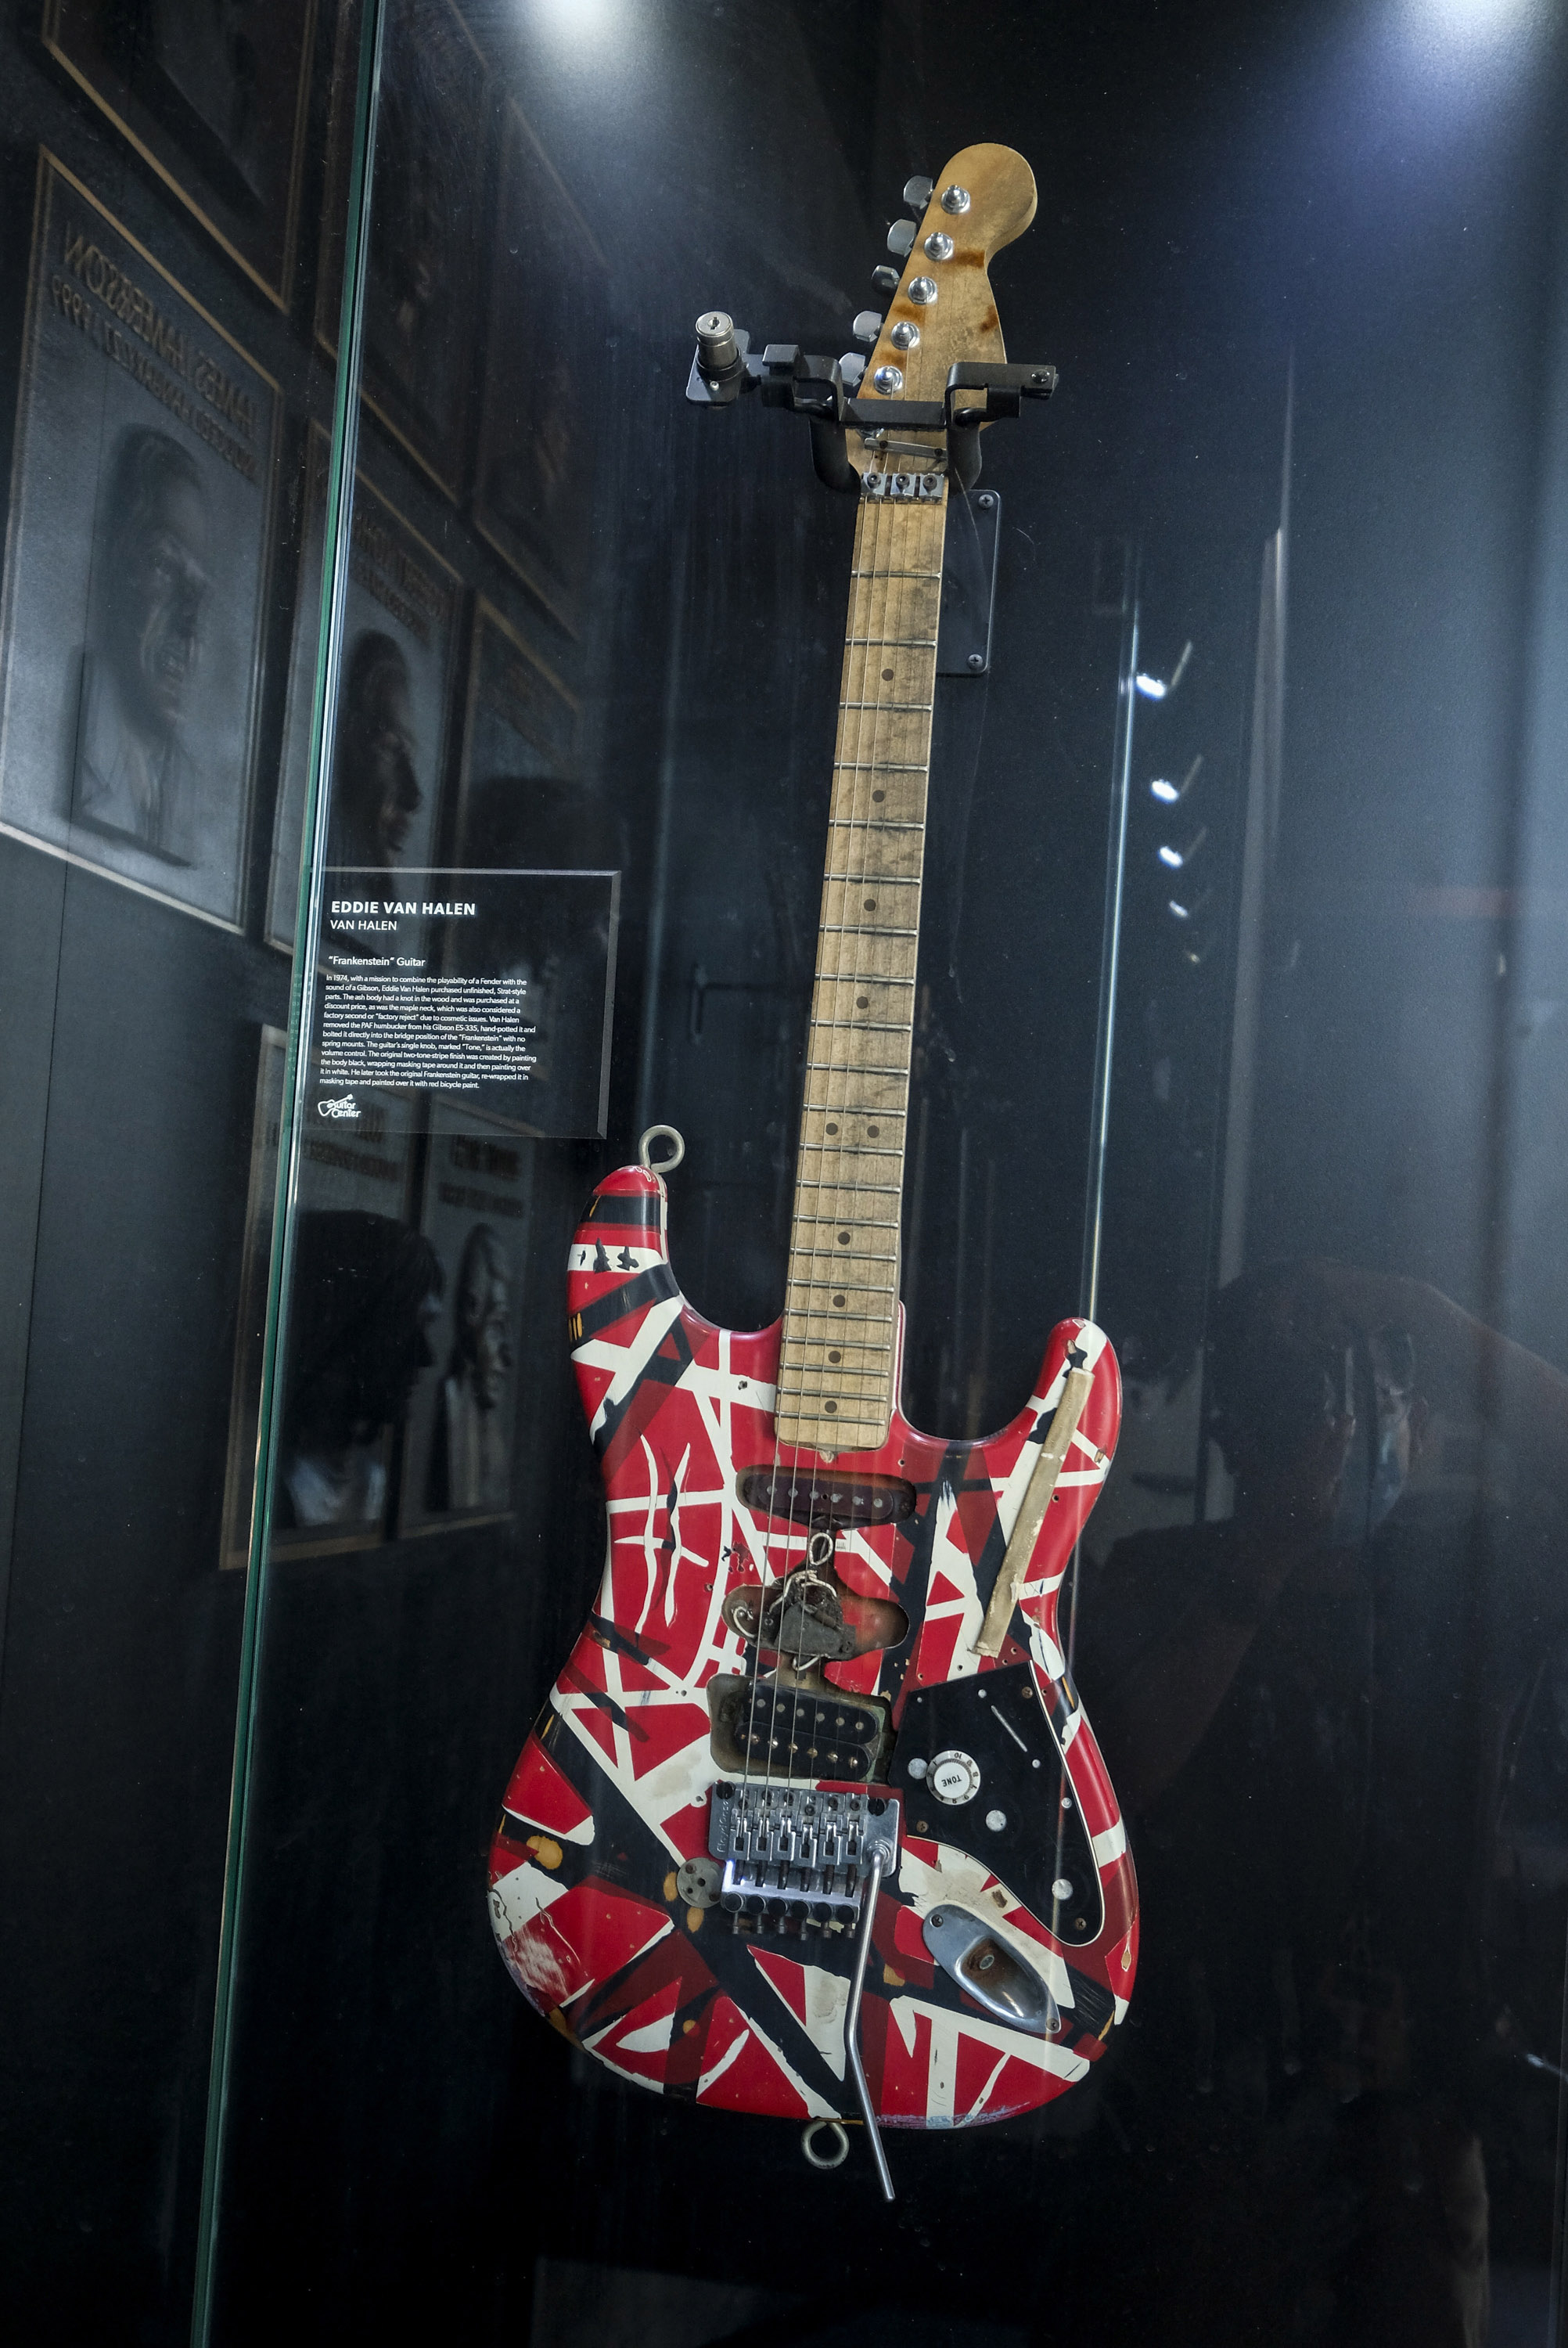 Rob Curley: Remembering Eddie Van Halen and his legendary guitar formed by a Spokane man | The 